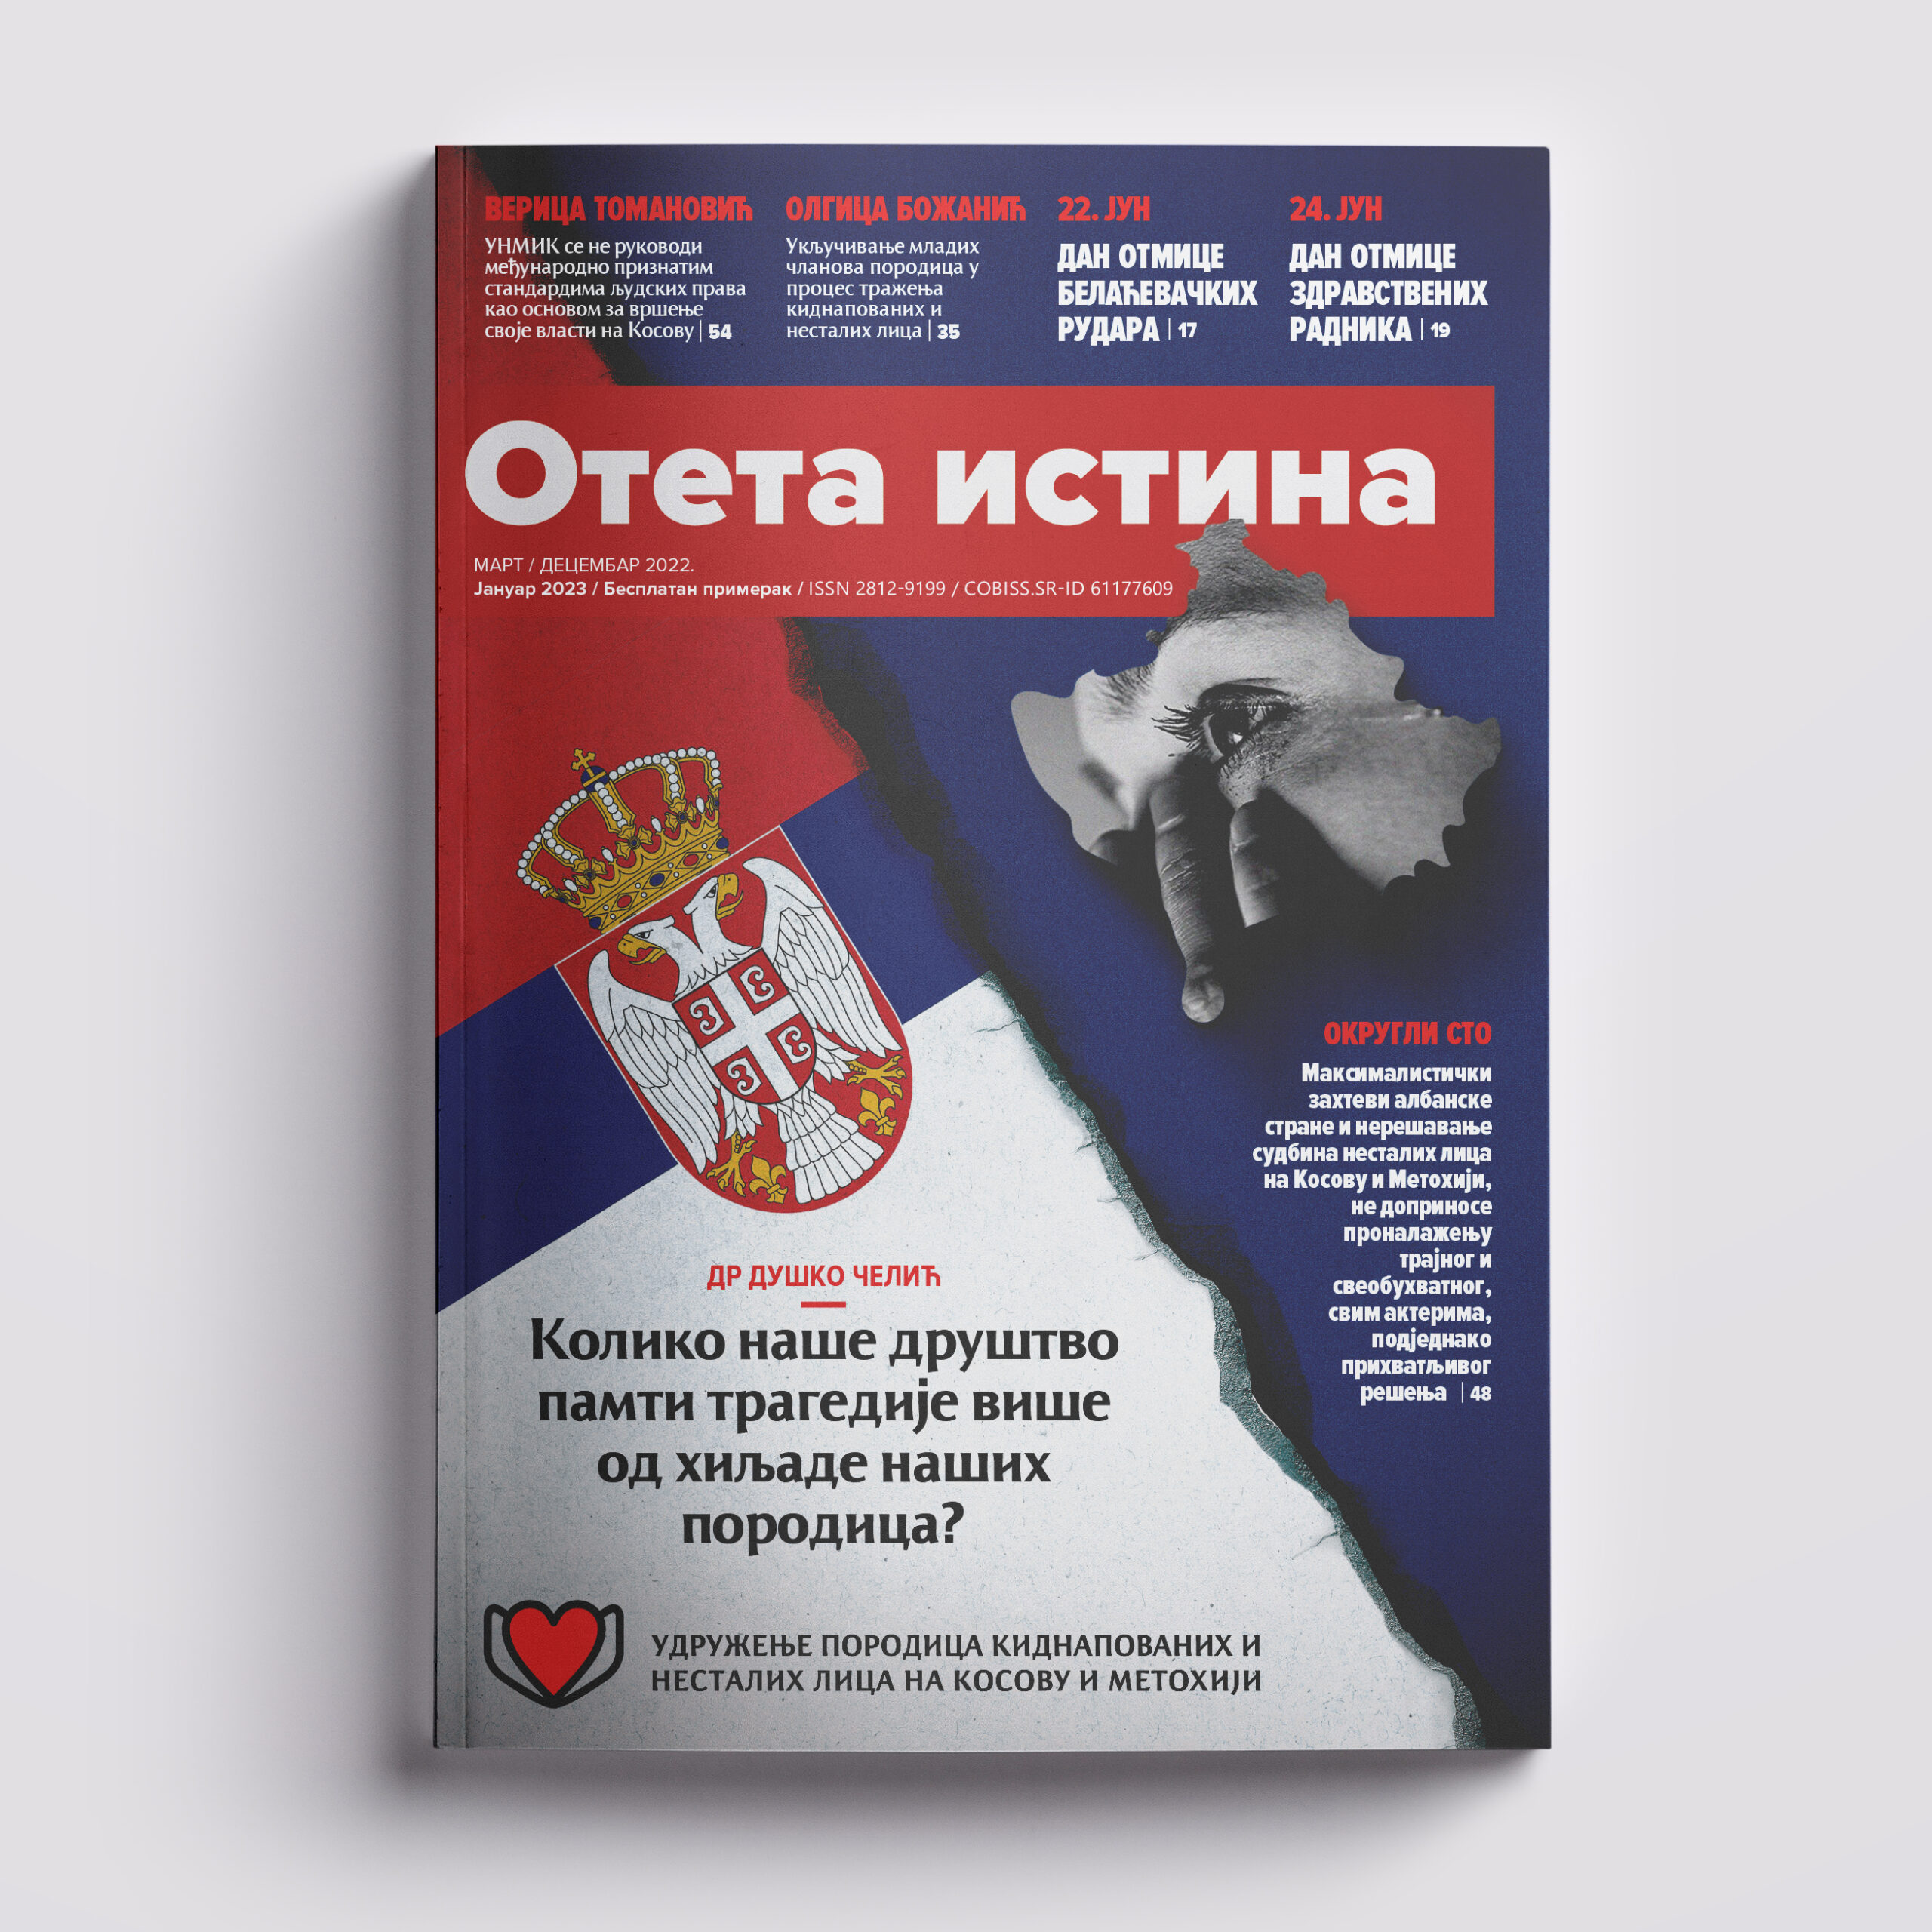 You are currently viewing “Oteta istina”-mart/decembar 2022.